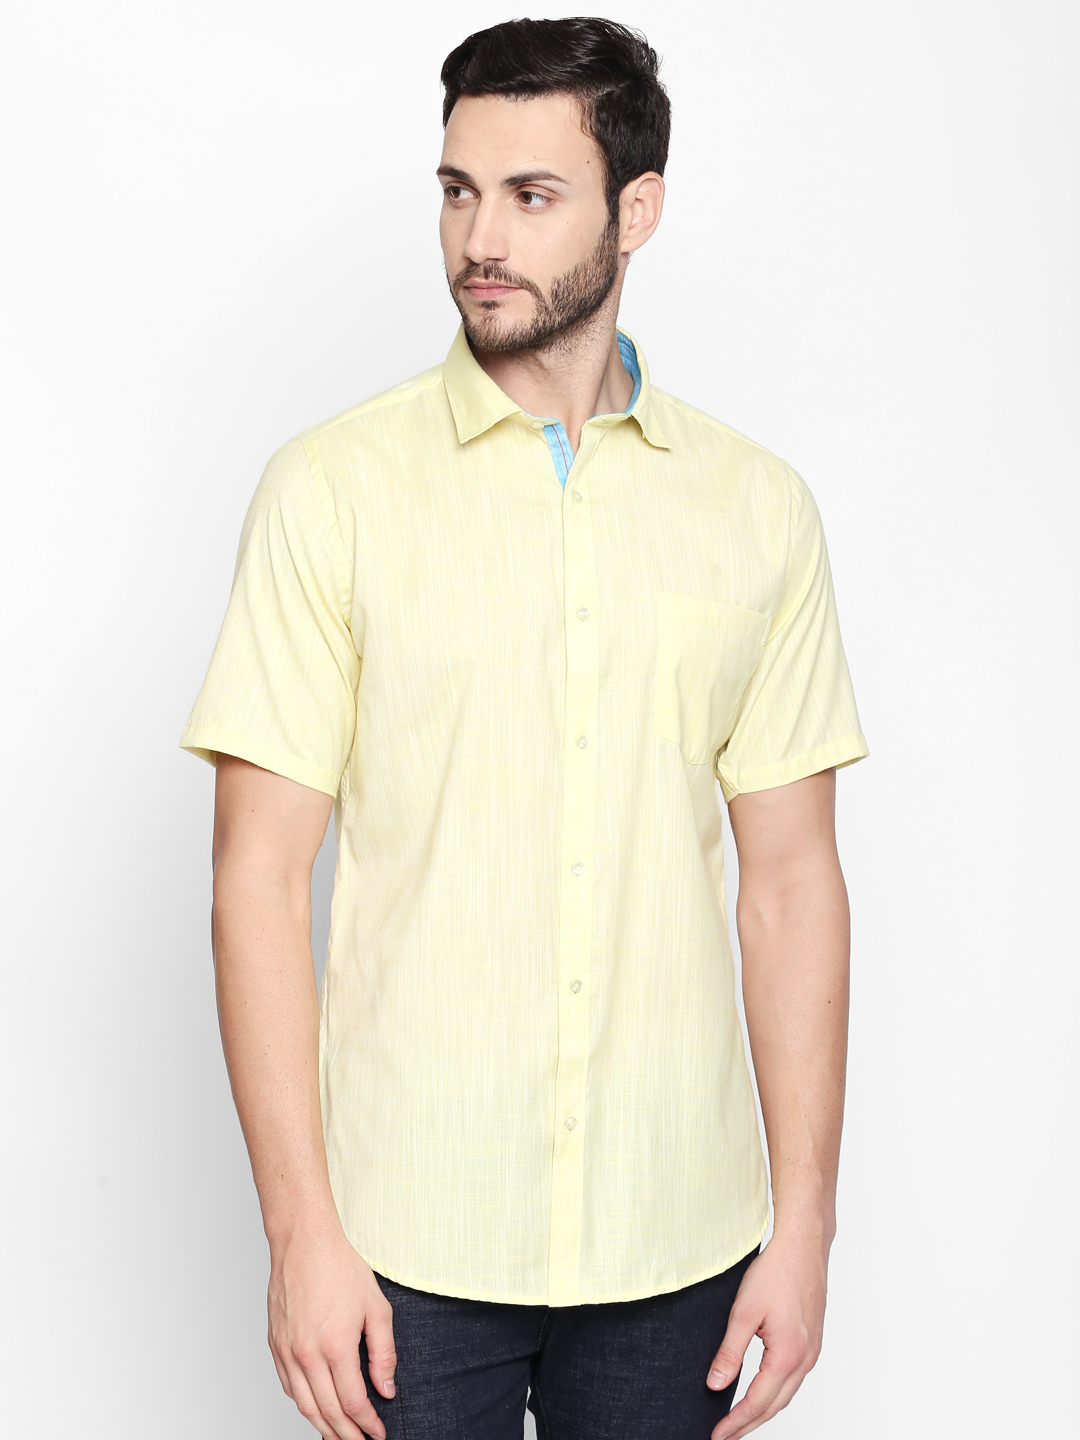 Buy Solemio 100% Cotton Shirt For Mens Online @ ₹598 from ShopClues